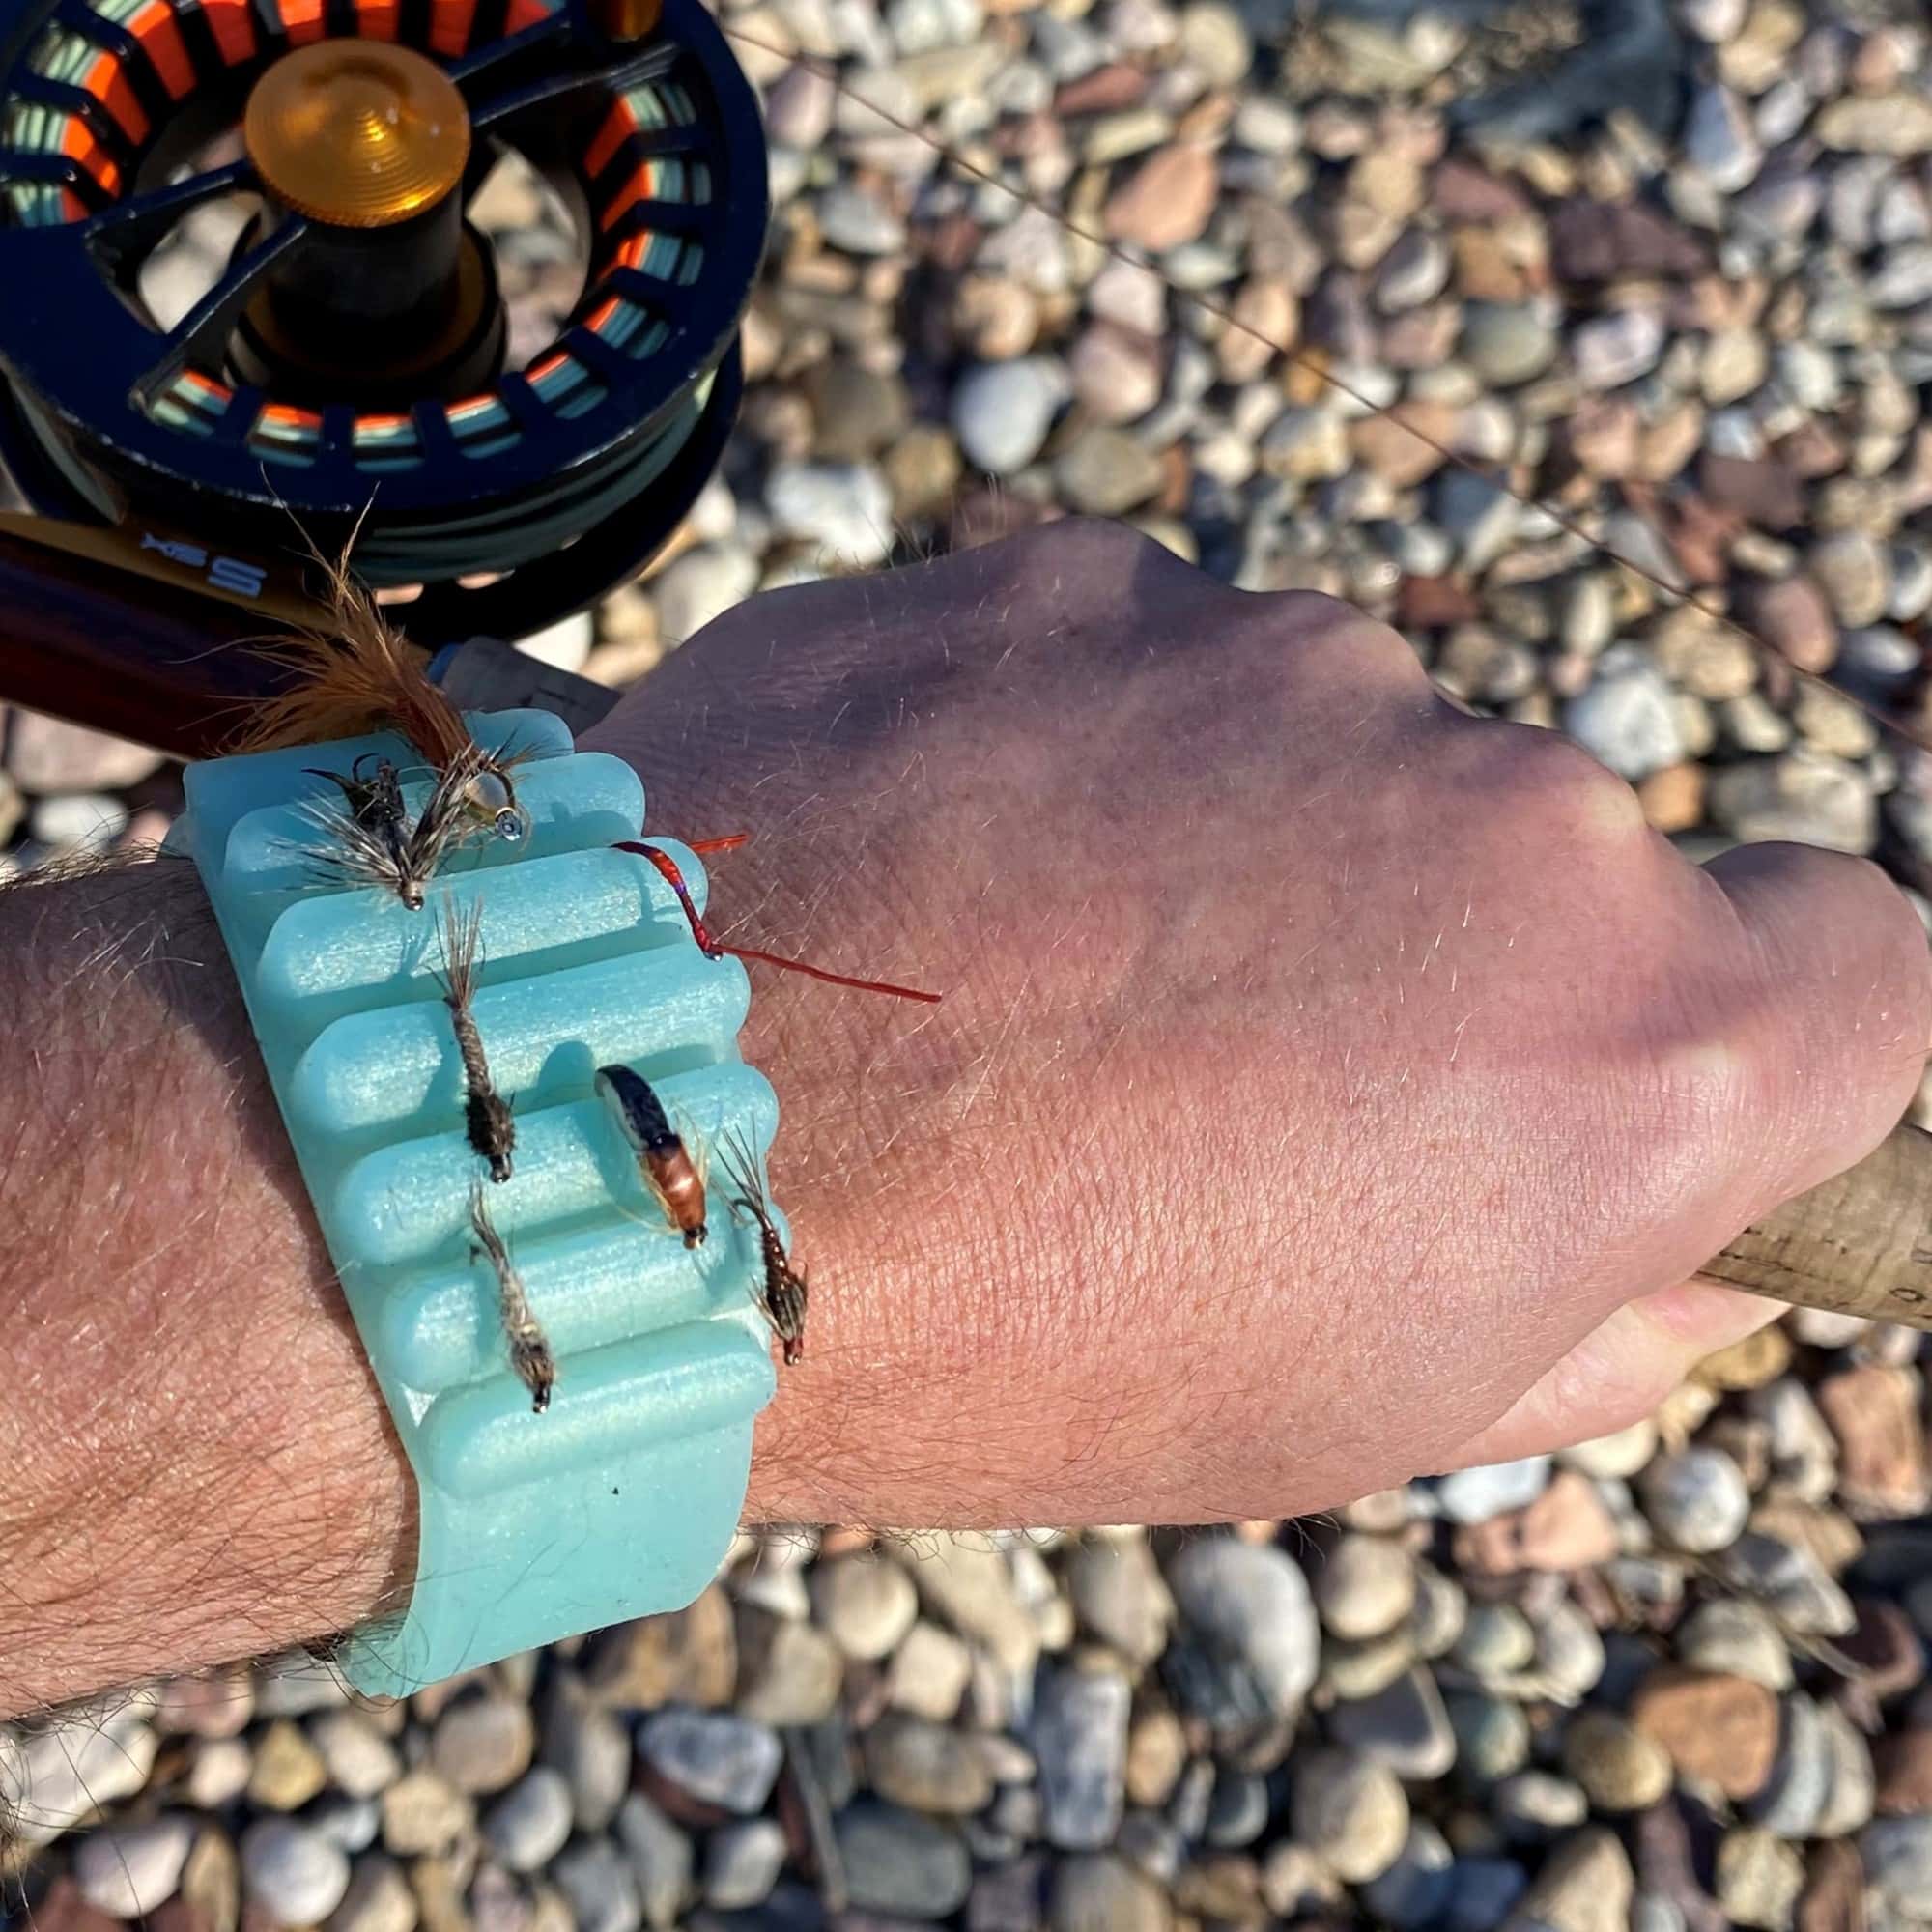 Fly-on Wrist Band - Unique Fly Fishing Accessory Holds Extra Flies  Conveniently on Your Wrist - Perfect Fly Fishing Gift - Ideal for Trout,  Bass, Panfish - Keep Your Fly Box Stowed